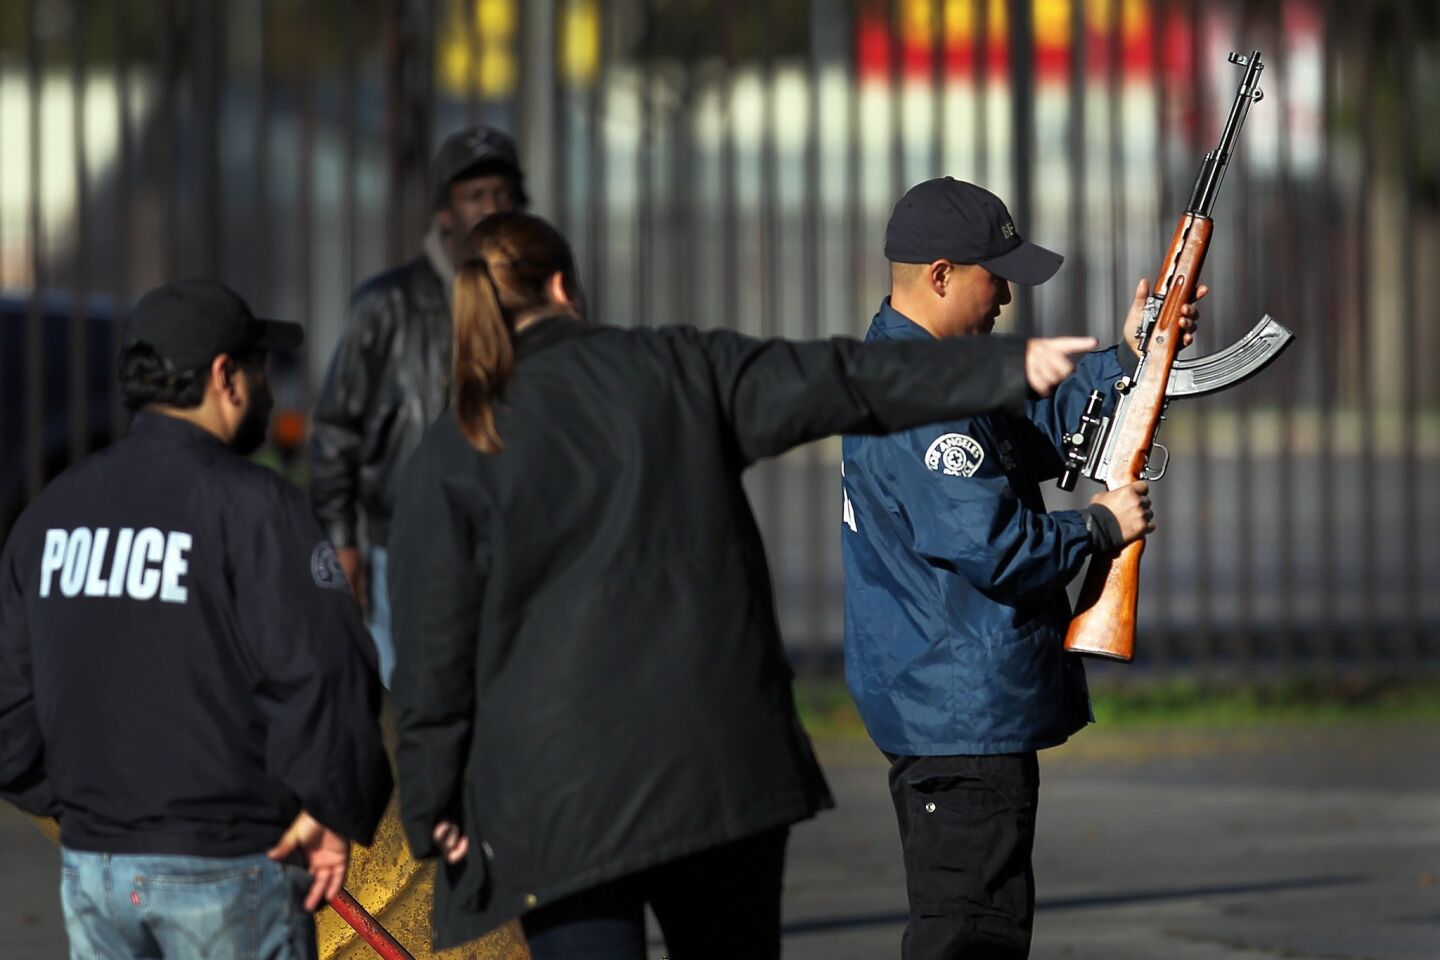 An officer inspects a weapon turned in during the gun buyback.